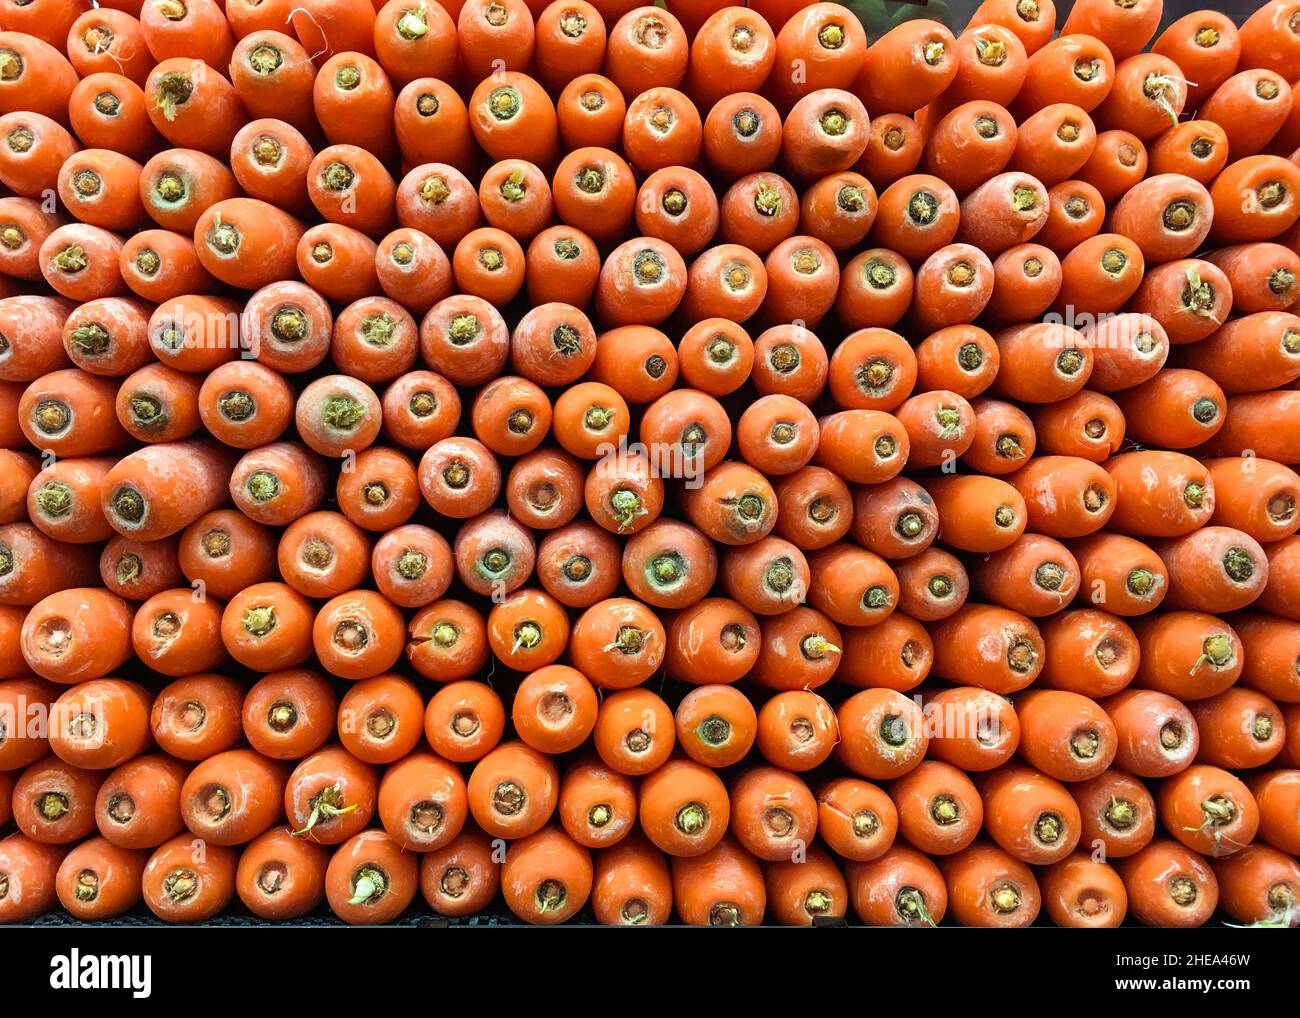 Neatly organised stack or organic carrots Stock Photo